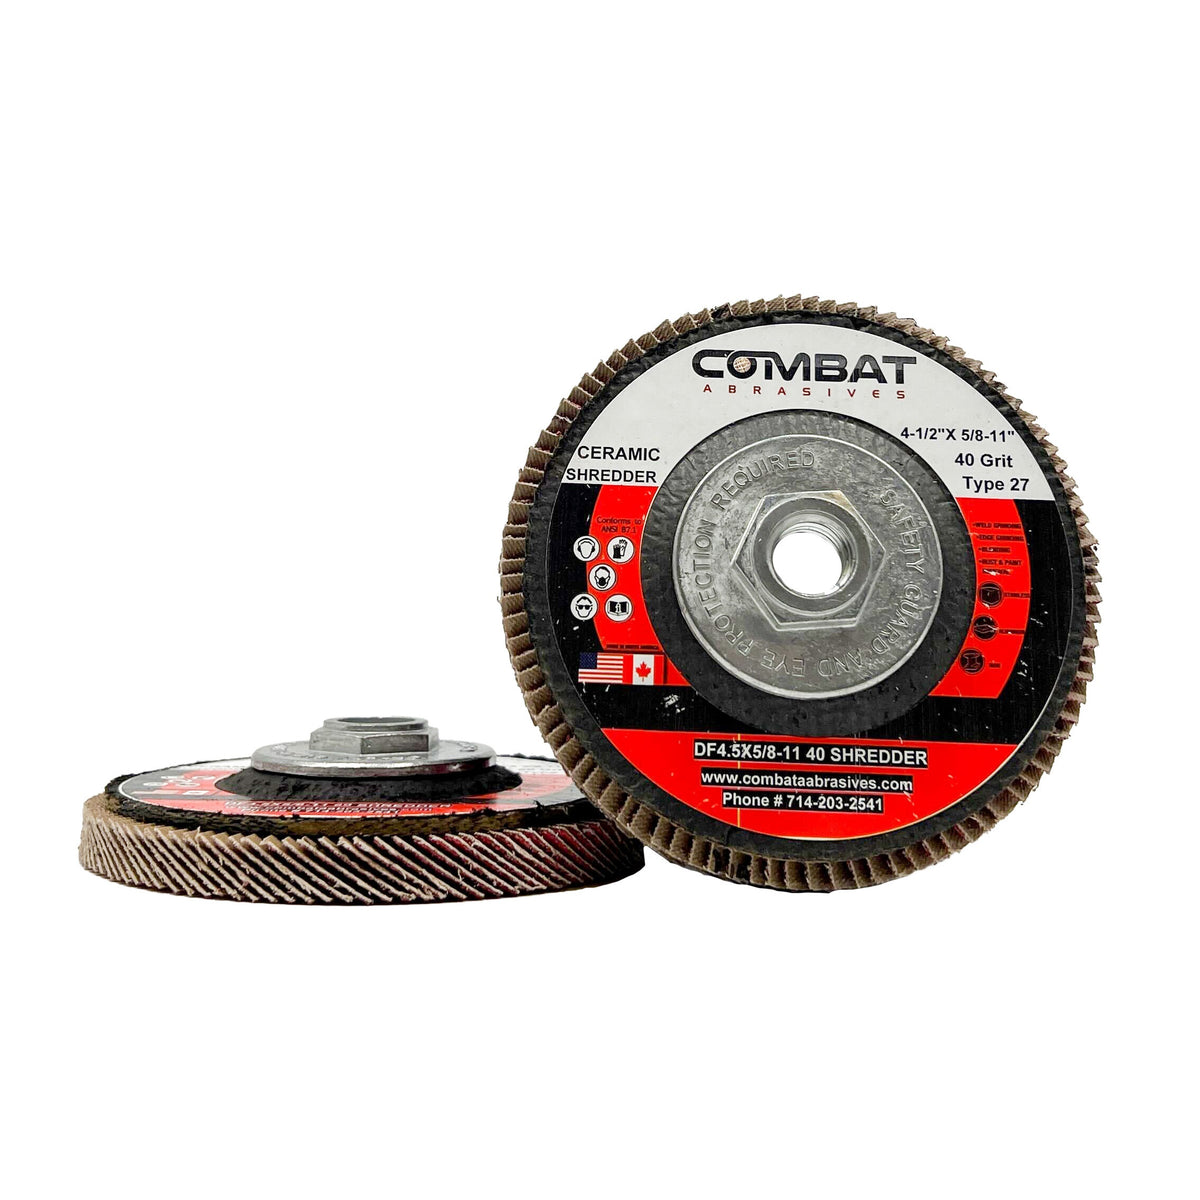 Side and top view of Renegade Products USA Ceramic Shredder Flap Discs, sized 4-1/2&quot; x 5/8-11&quot;, with Hub (Type 29) and labeled as having 5X LIFE! The image showcases the 40 Grit texture and sturdy construction of the discs. Specifically designed for high-performance grinding and polishing, these flap discs offer a long-lasting and efficient solution for metalworking professionals.